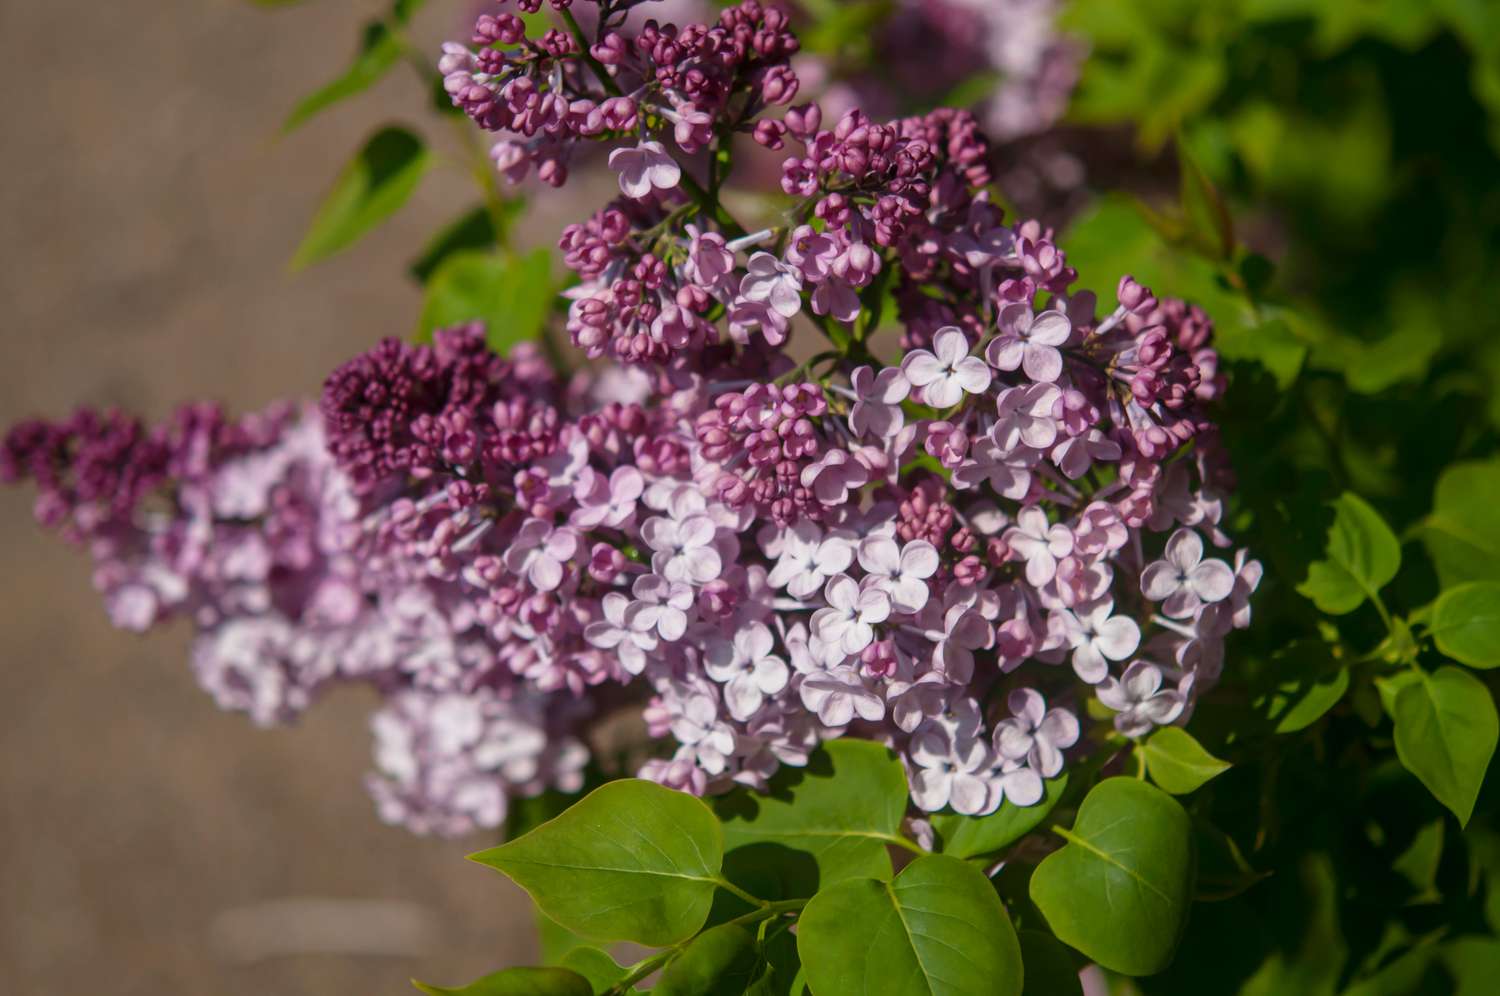 Maiden's blush lilac with reddish-purple flowers and buds closeup